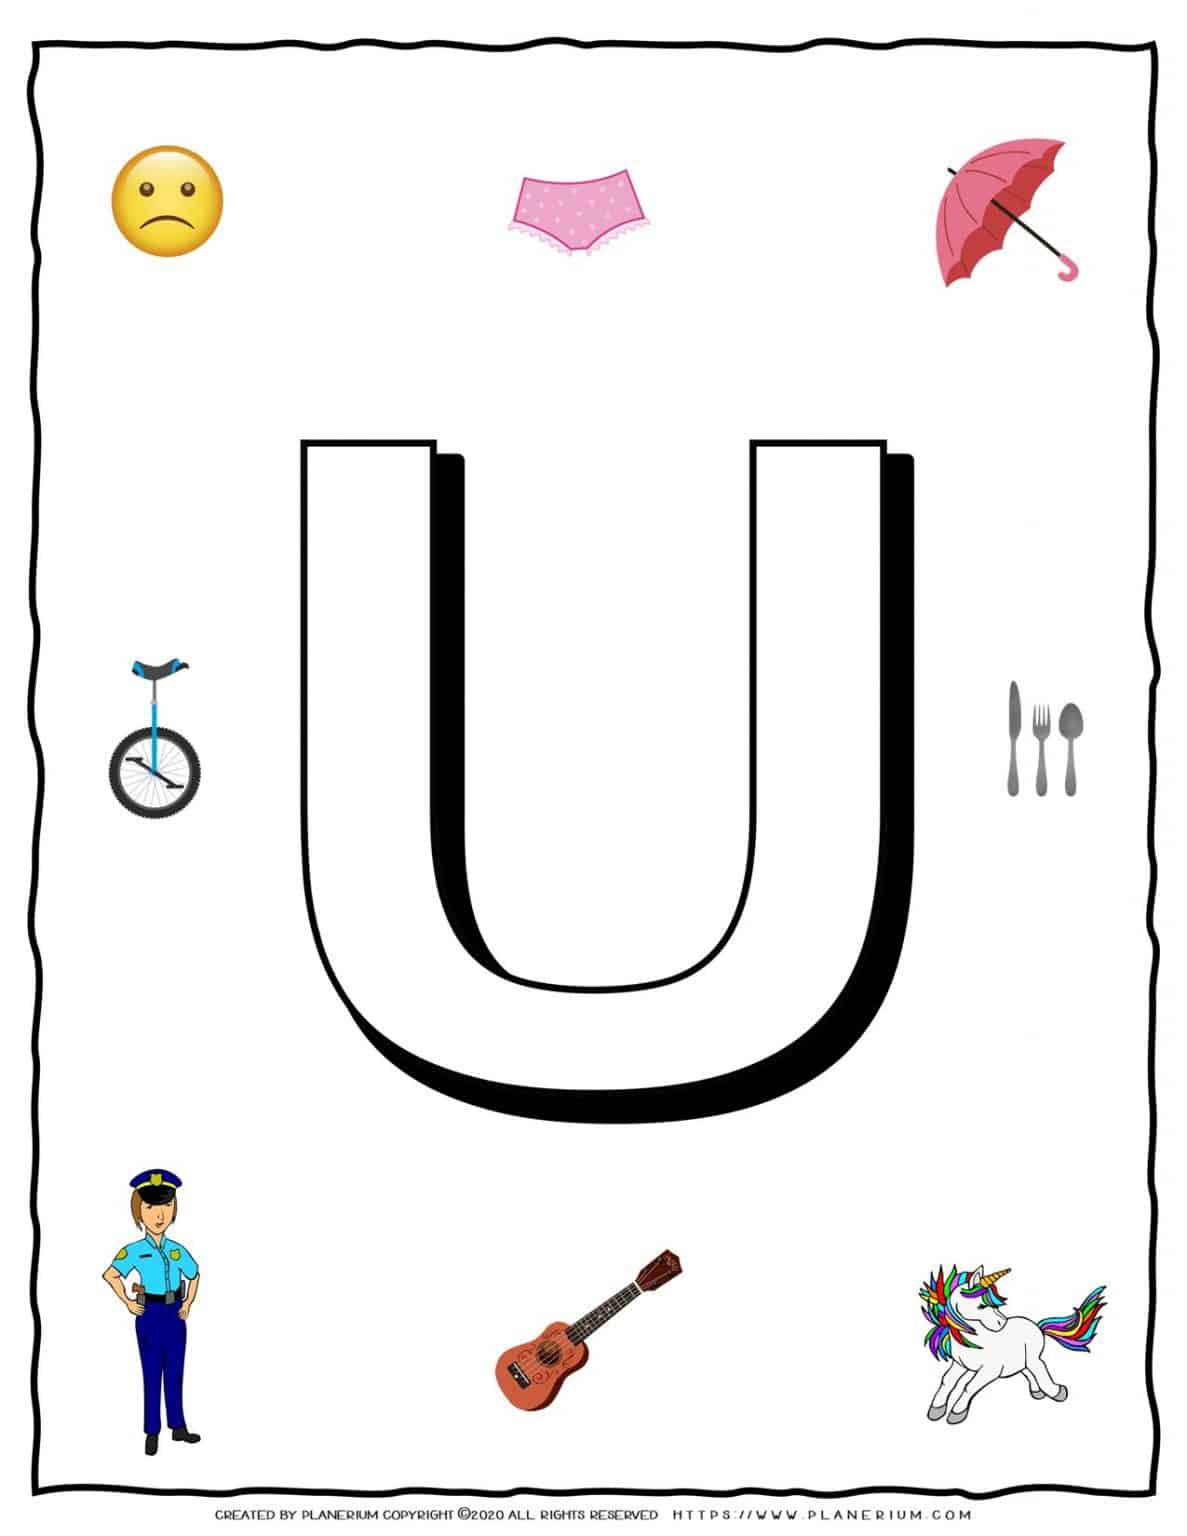 What Are Some Things That Start With Letter U